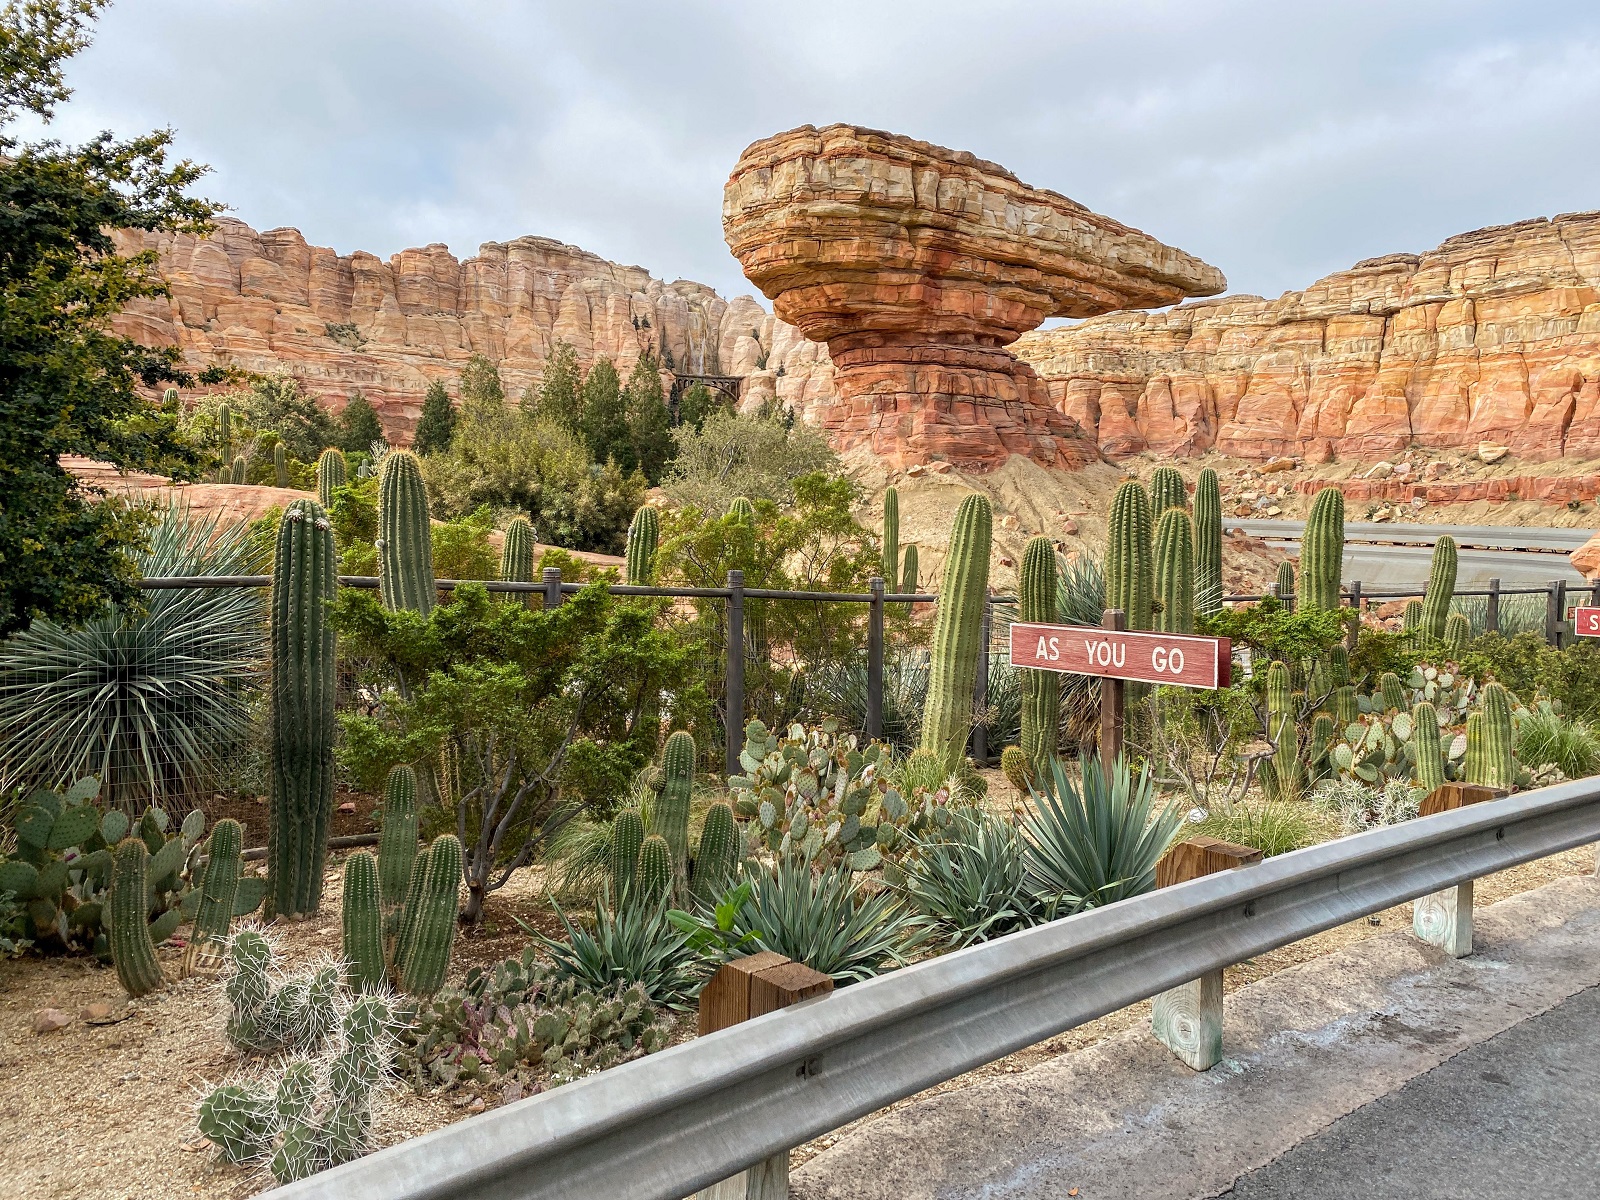 Image of desert and road scene from Cars Land at Disney California Adventure, which you can visit with a toddler quite easily